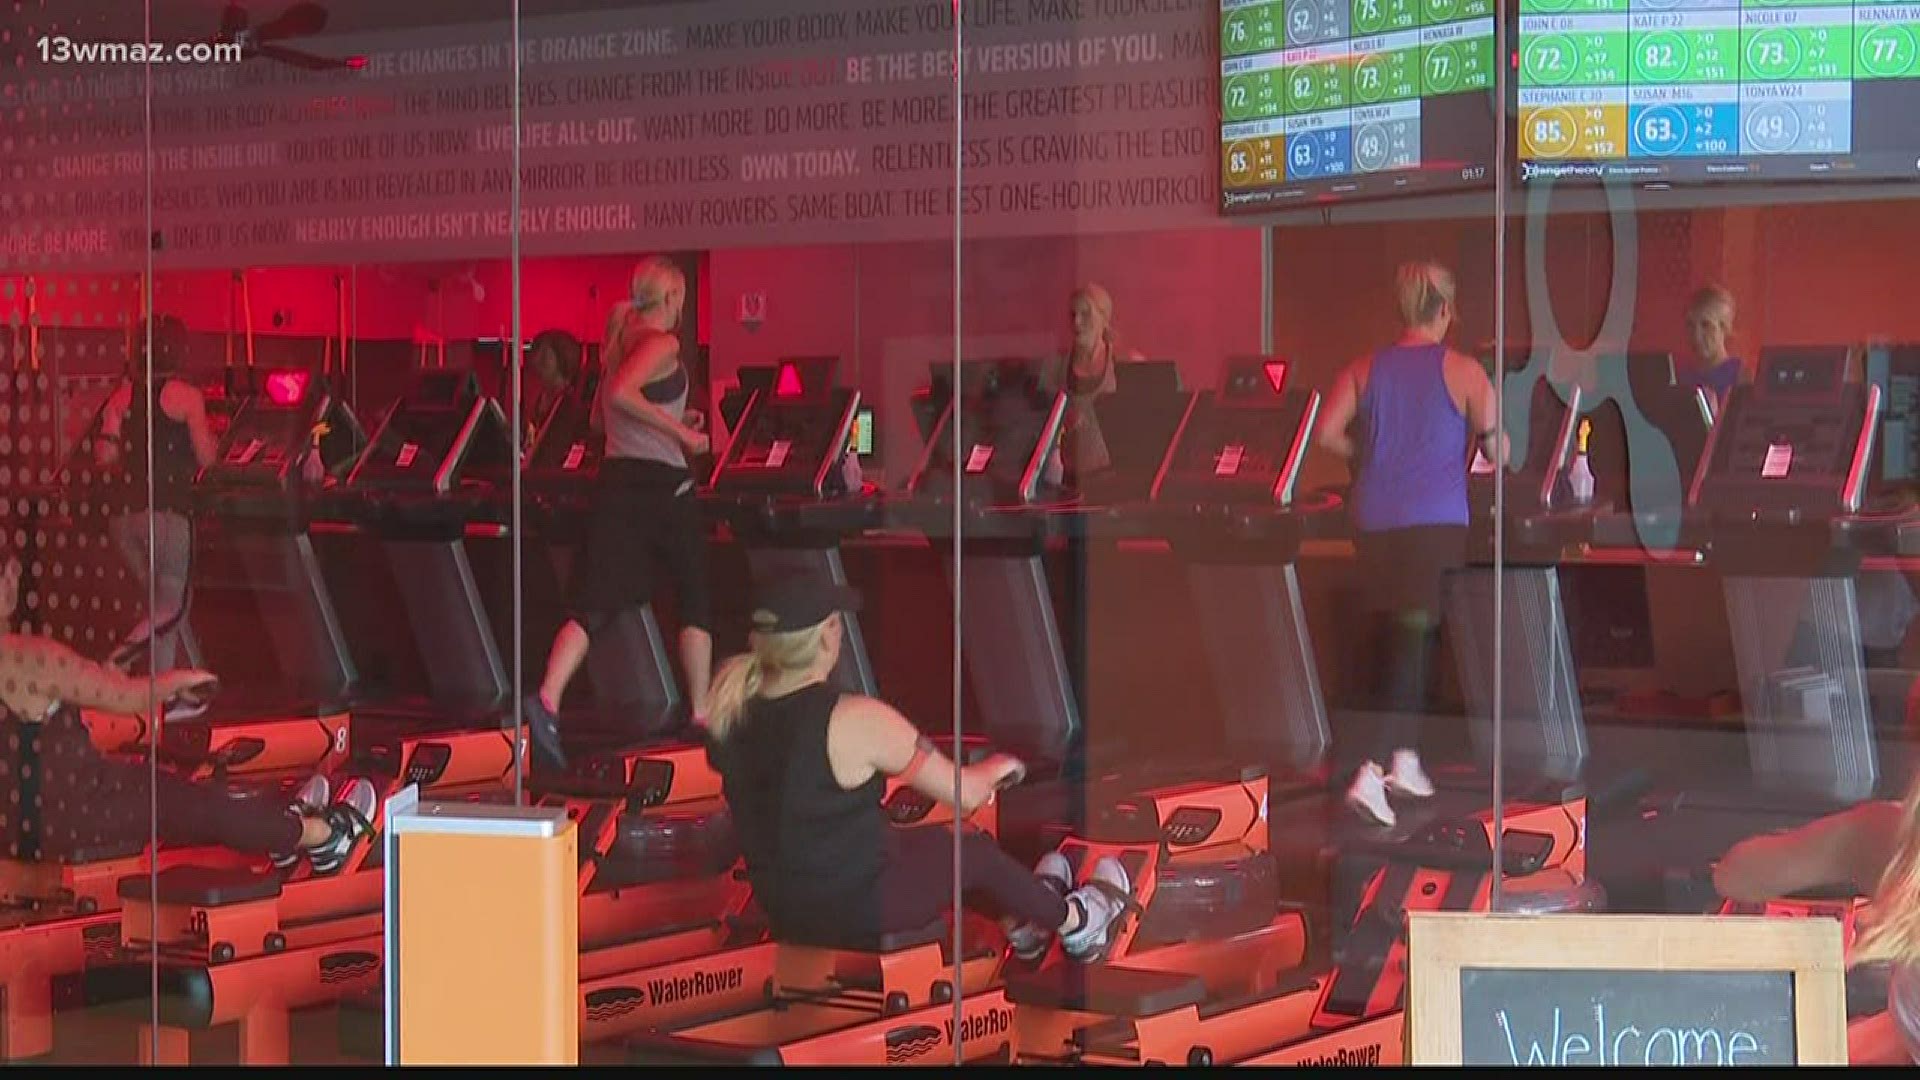 Most gyms in Central Georgia have already opened, but group exercising classes are just starting back up for their members.